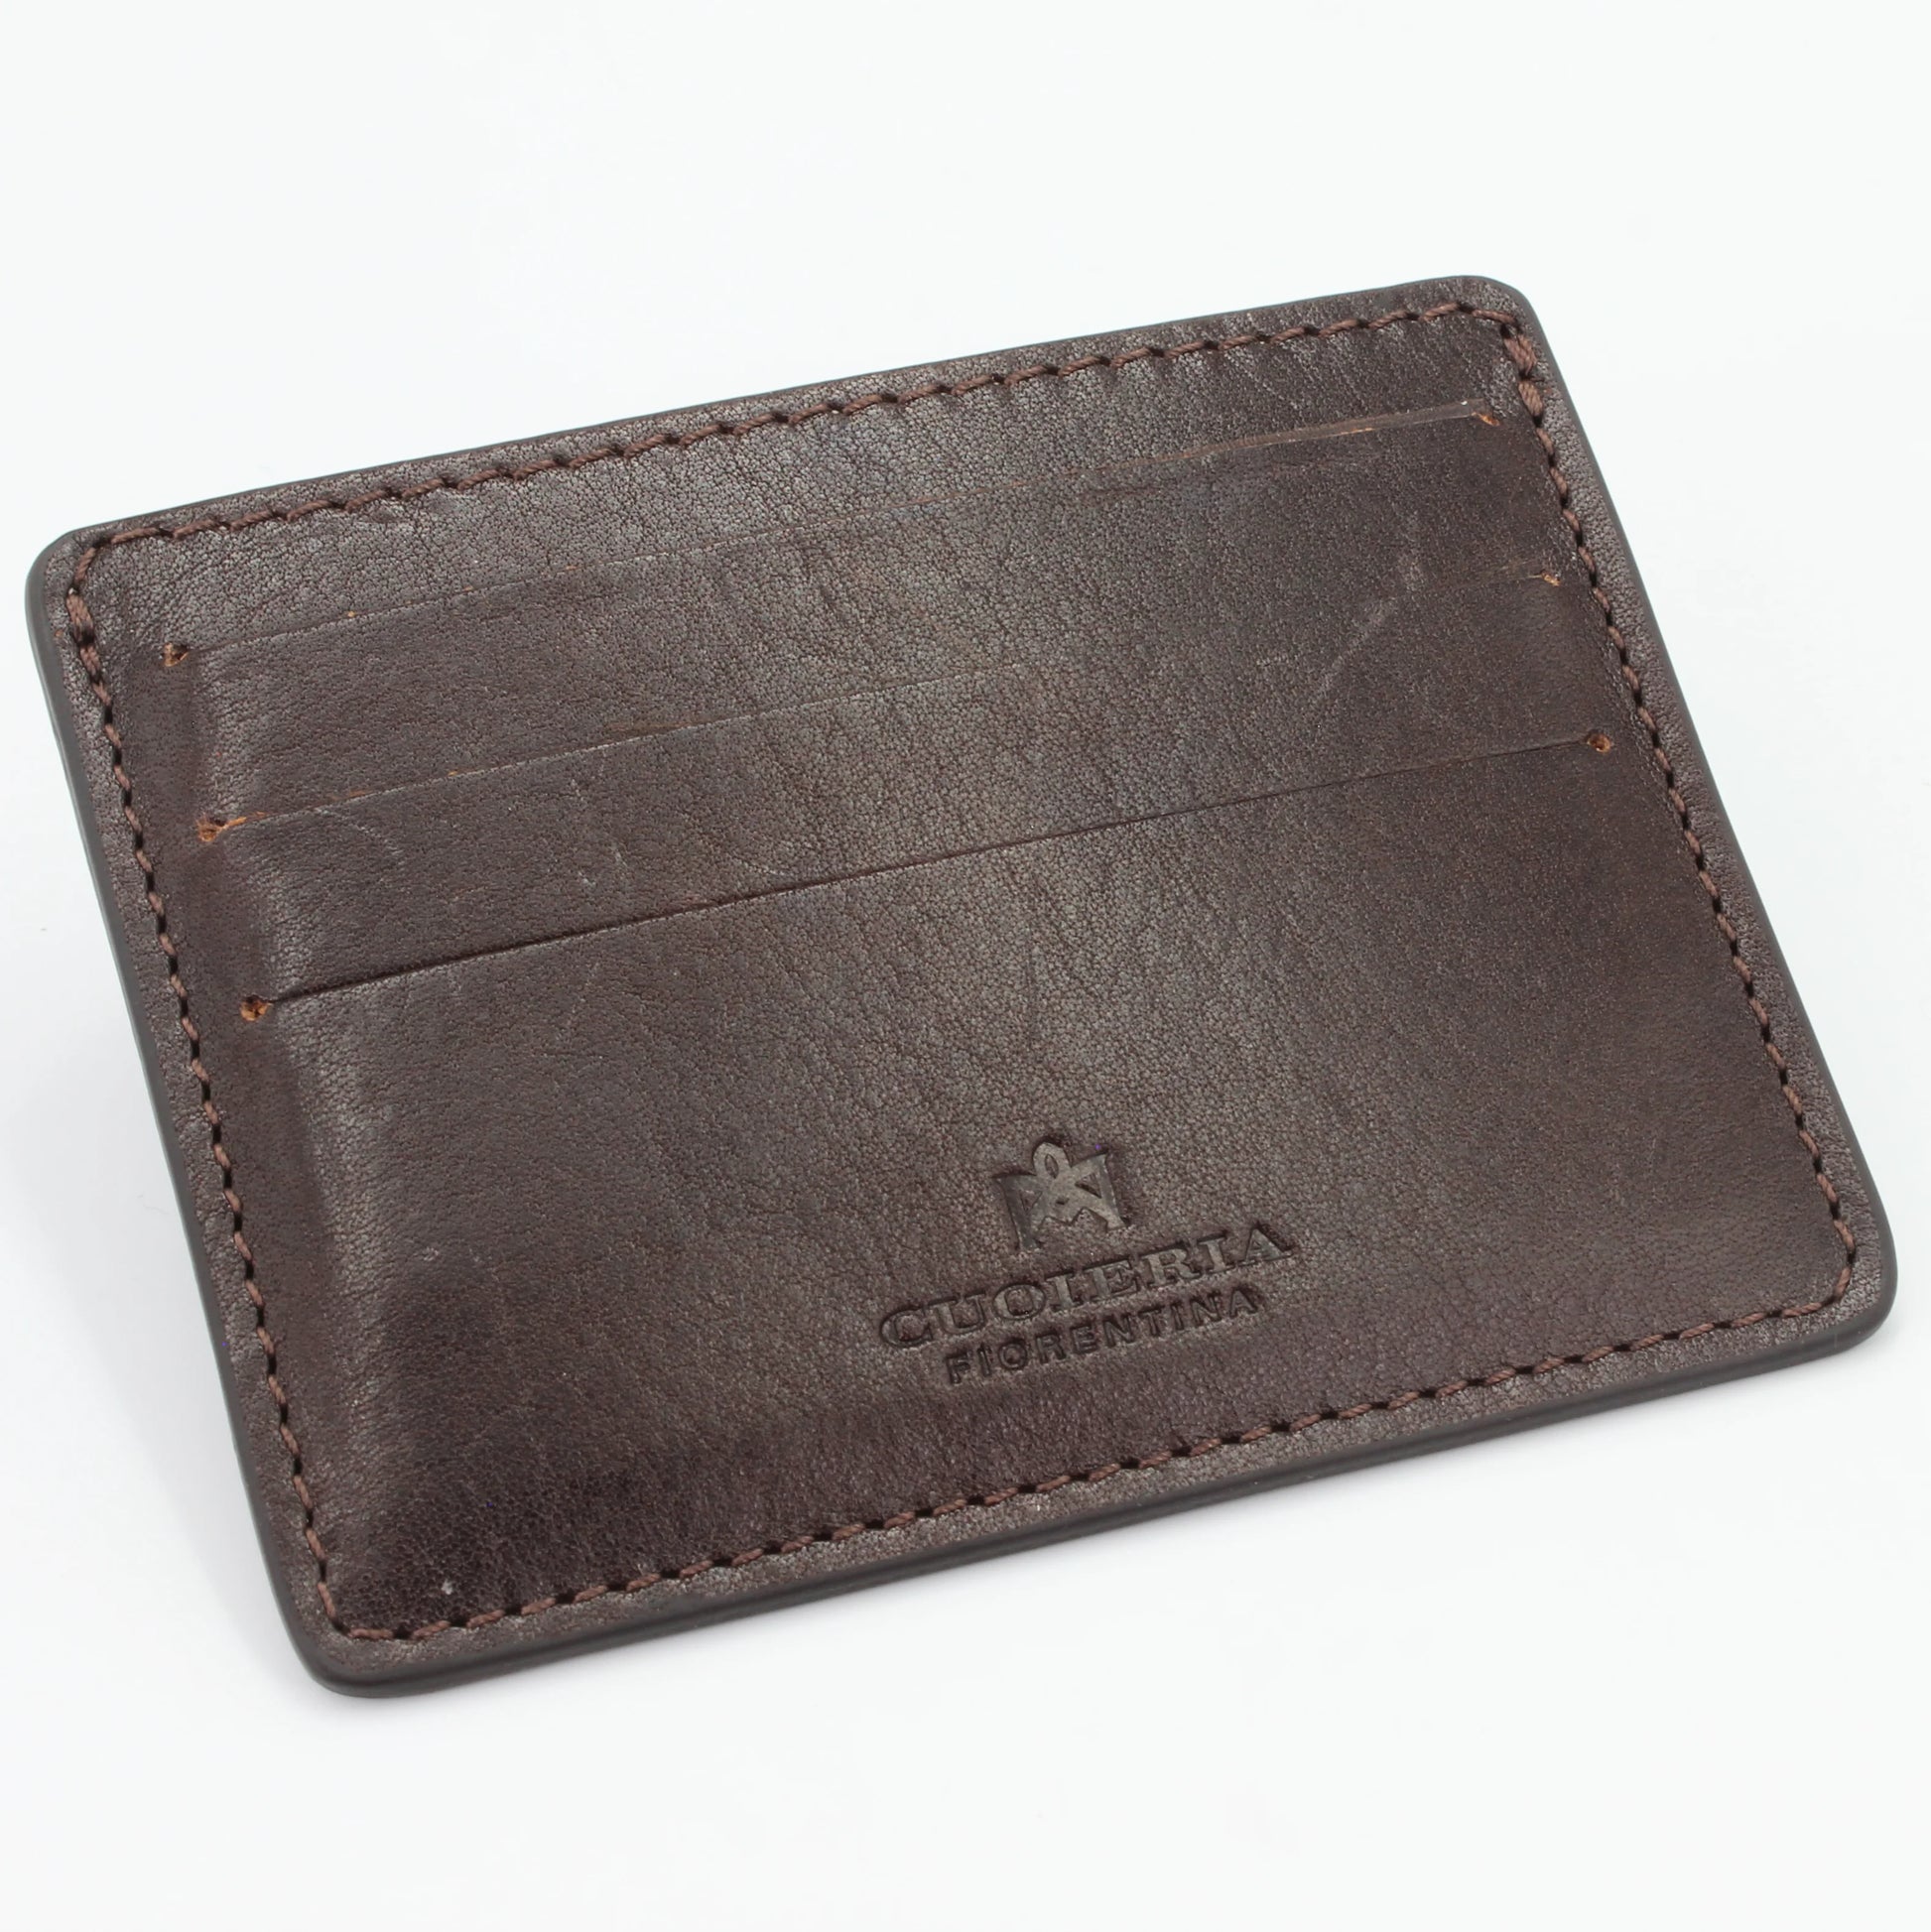 Shop our Italian-made Cuoieria Fiorentina Italian leather card holder in testa di moro (P000000012735) or browse our range of Italian wallets and purses for men & women in-store at Aliverti Cape Town, or shop online.   We deliver in South Africa & offer multiple payment plans as well as accept multiple safe & secure payment methods.